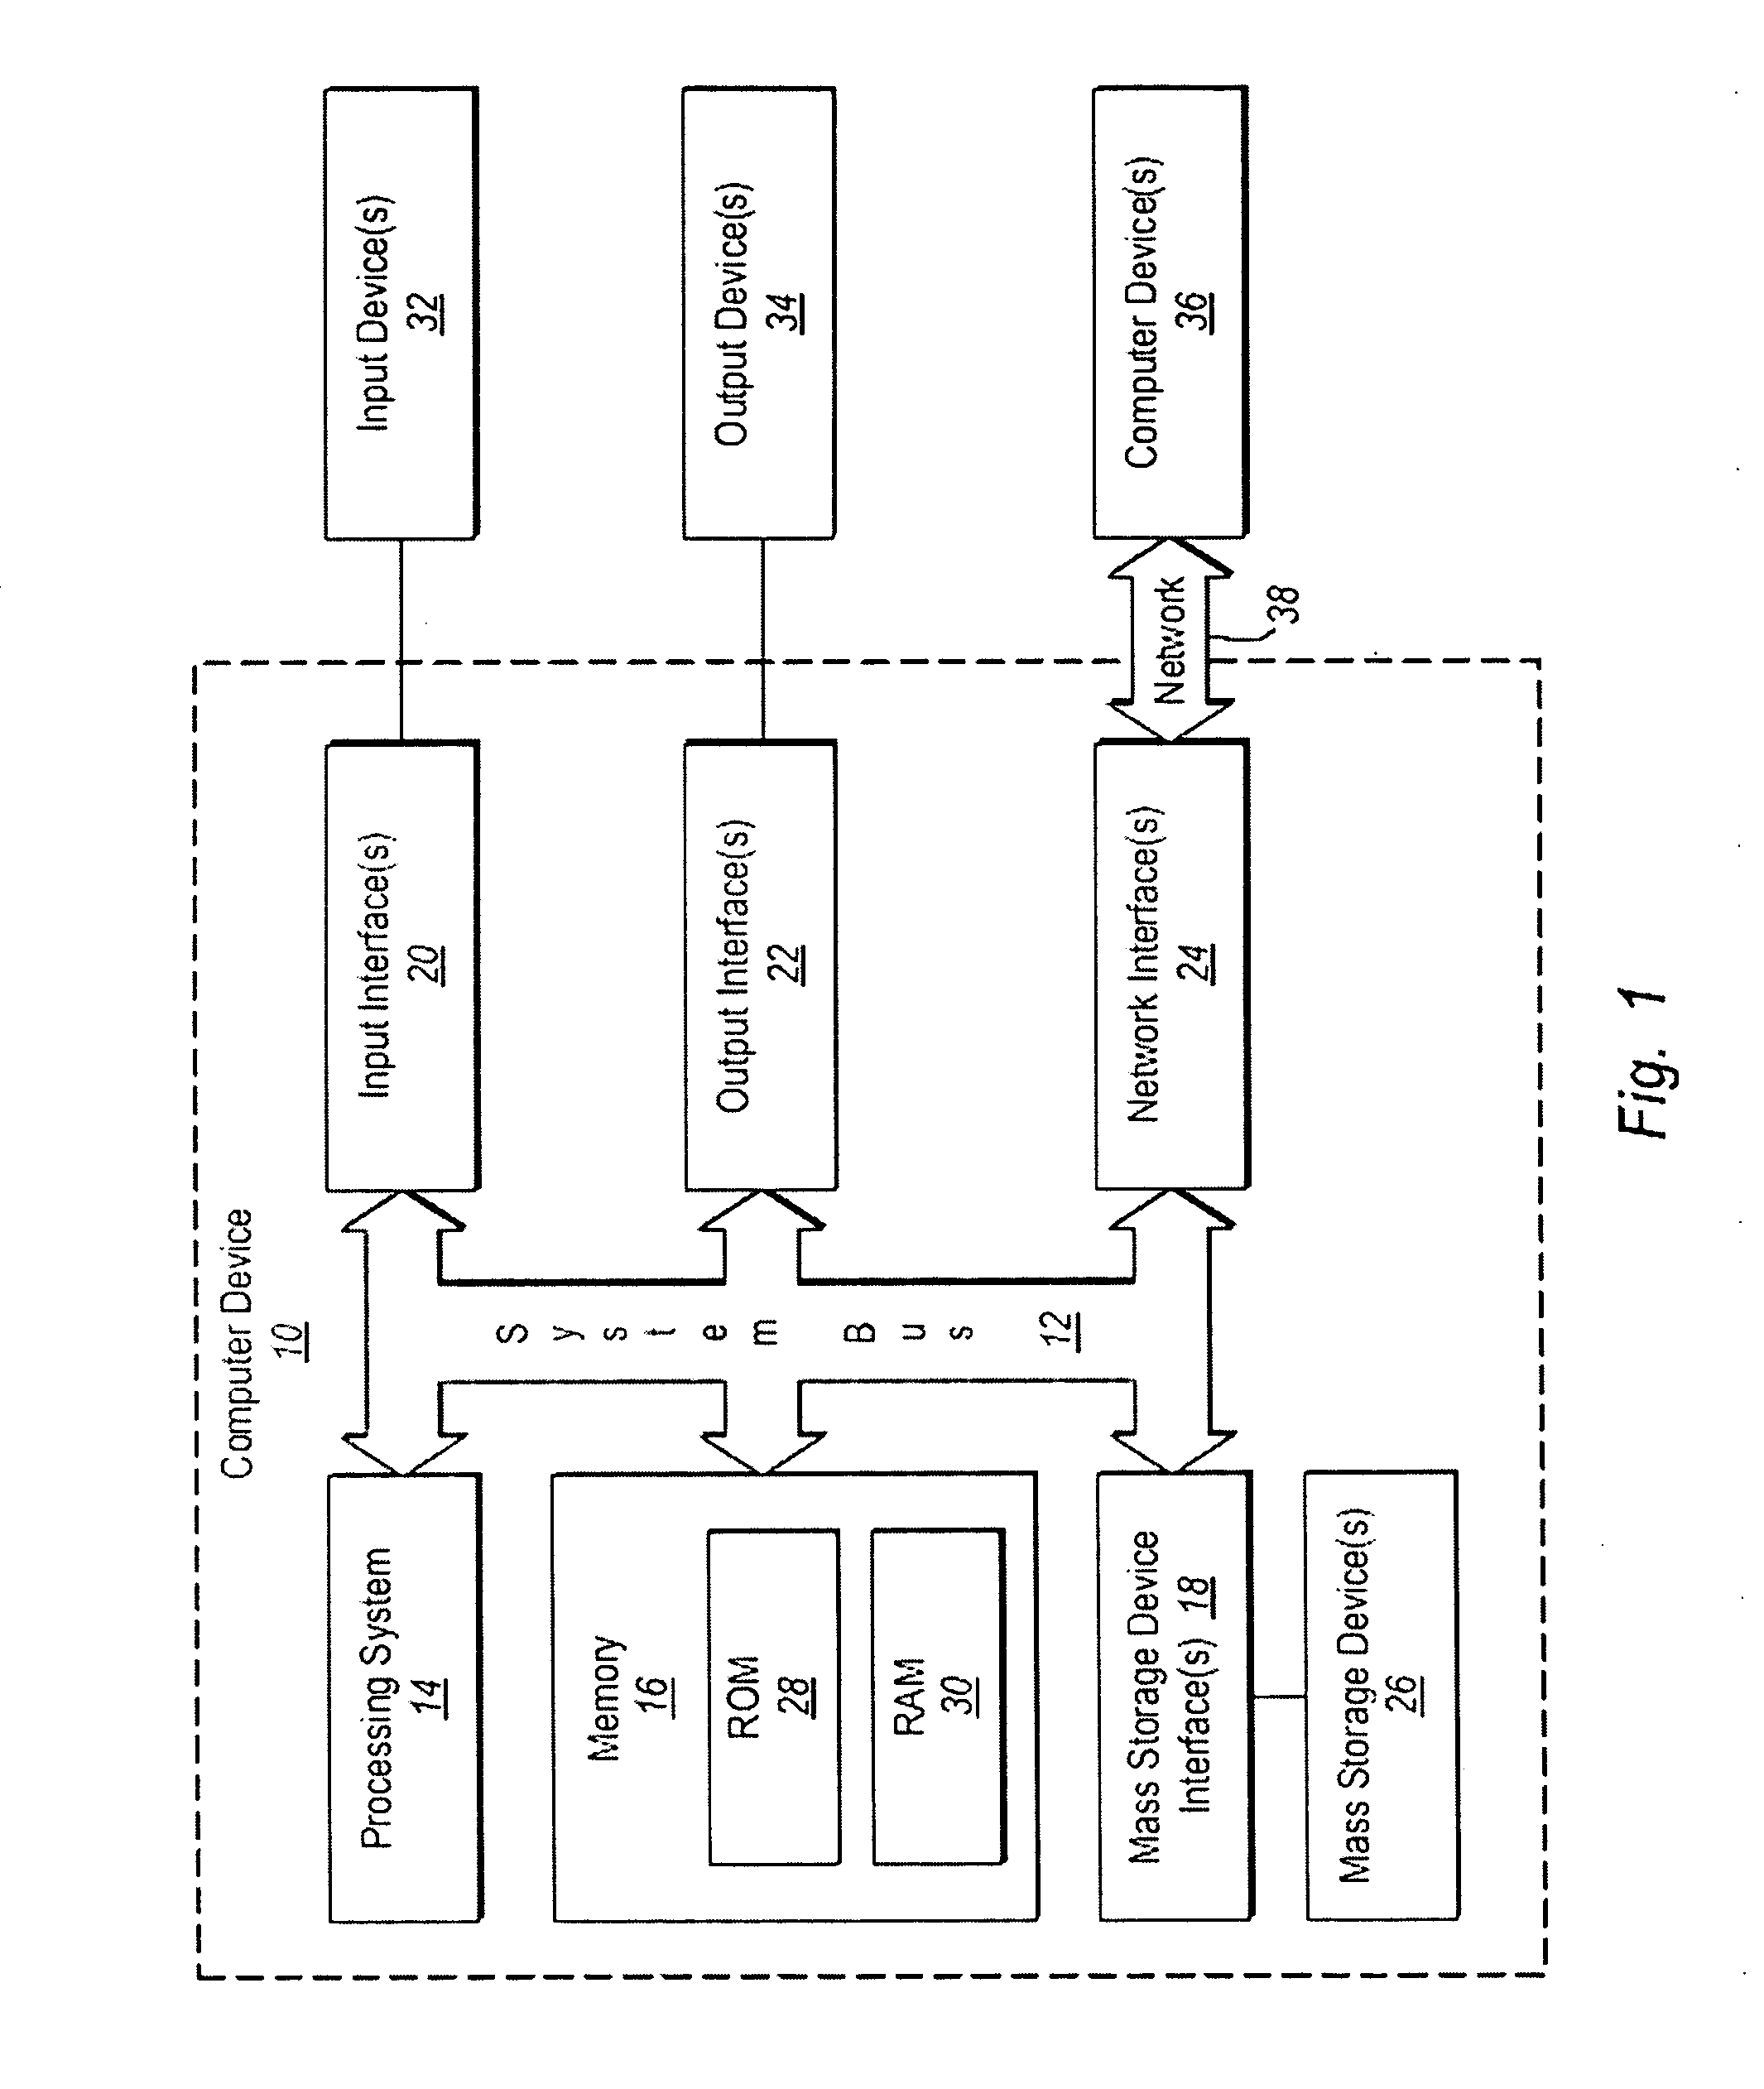 Systems and methods for dynamically updating computer systems